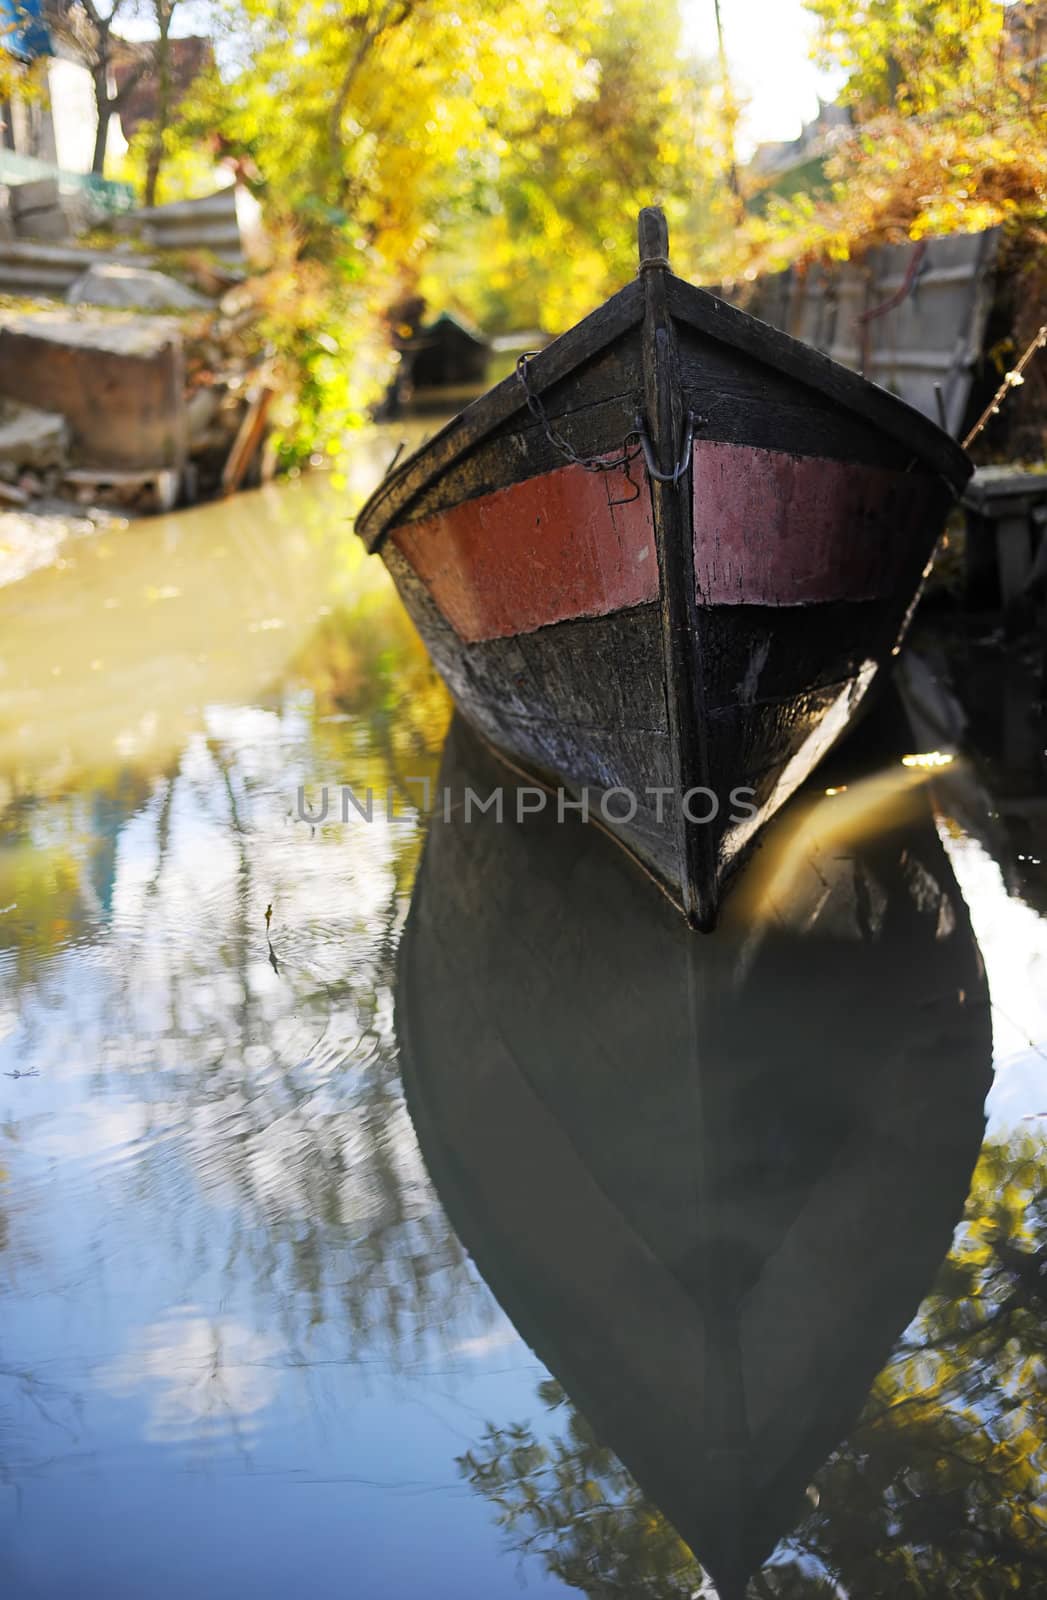 Small boat in Vylkove. Vylkove is also known as "The Ukrainian Venice" thanks to a number of channels excavated inside its territory � the reason why boating is a more common method of transport than an automobile.